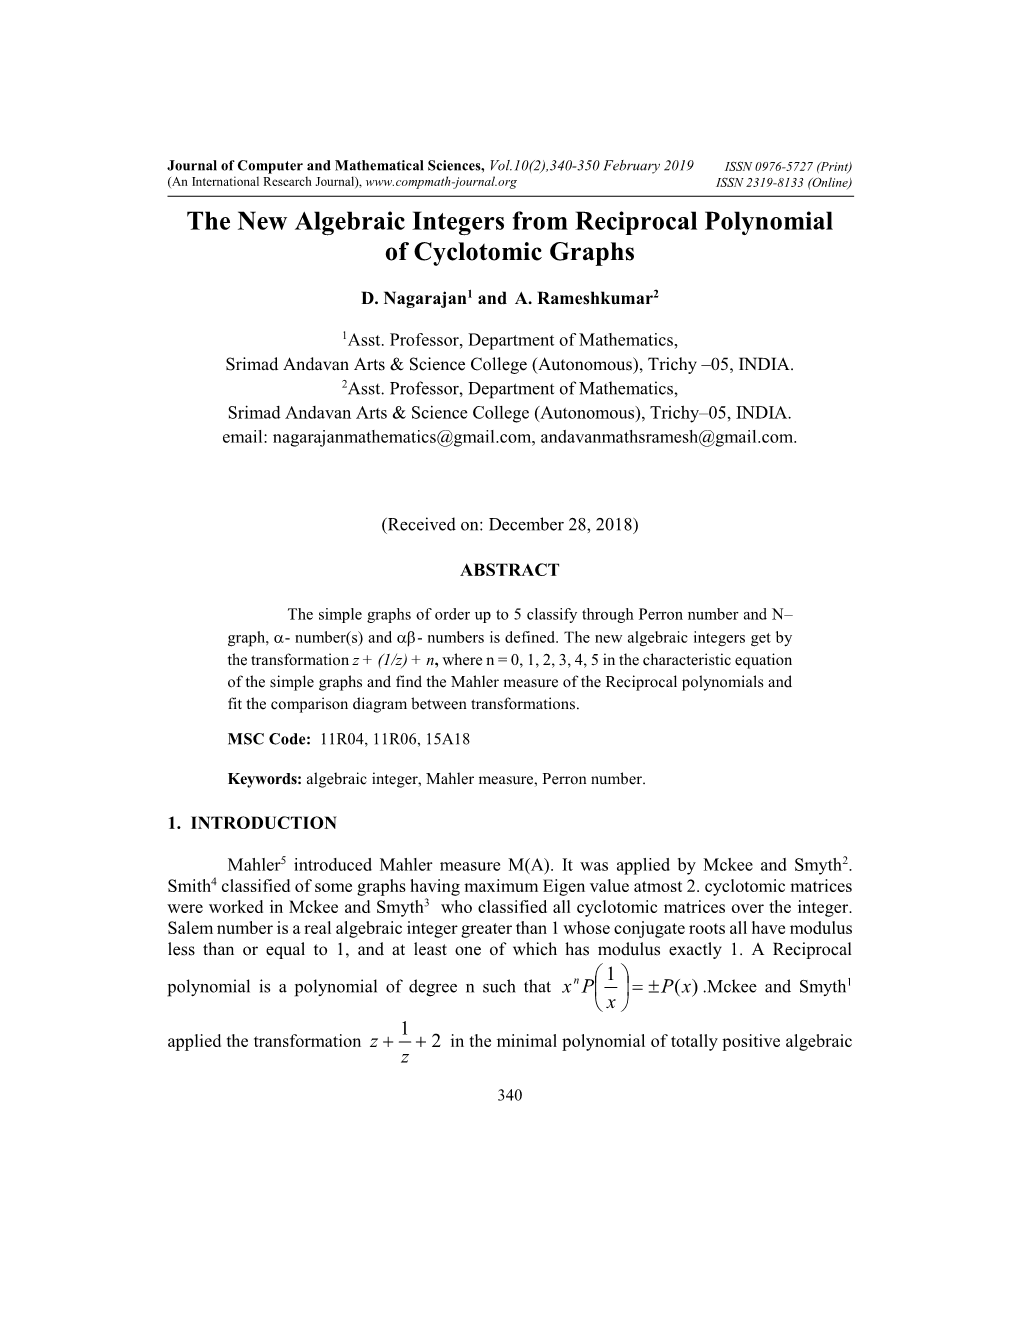 The New Algebraic Integers from Reciprocal Polynomial of Cyclotomic Graphs